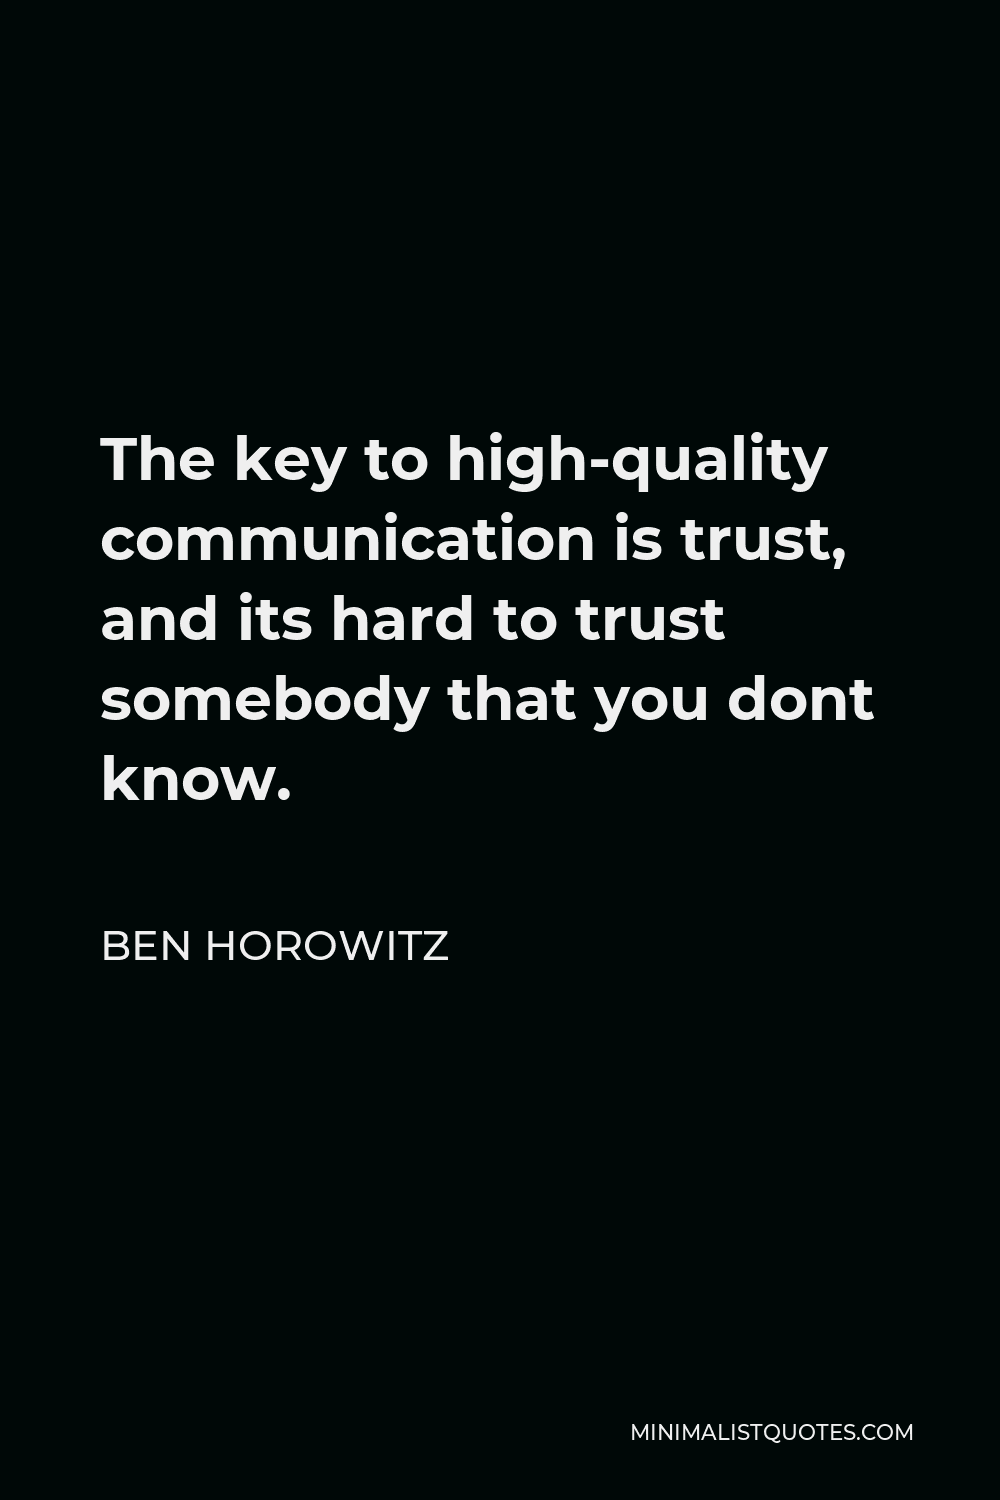 Ben Horowitz Quote - The key to high-quality communication is trust, and its hard to trust somebody that you dont know.